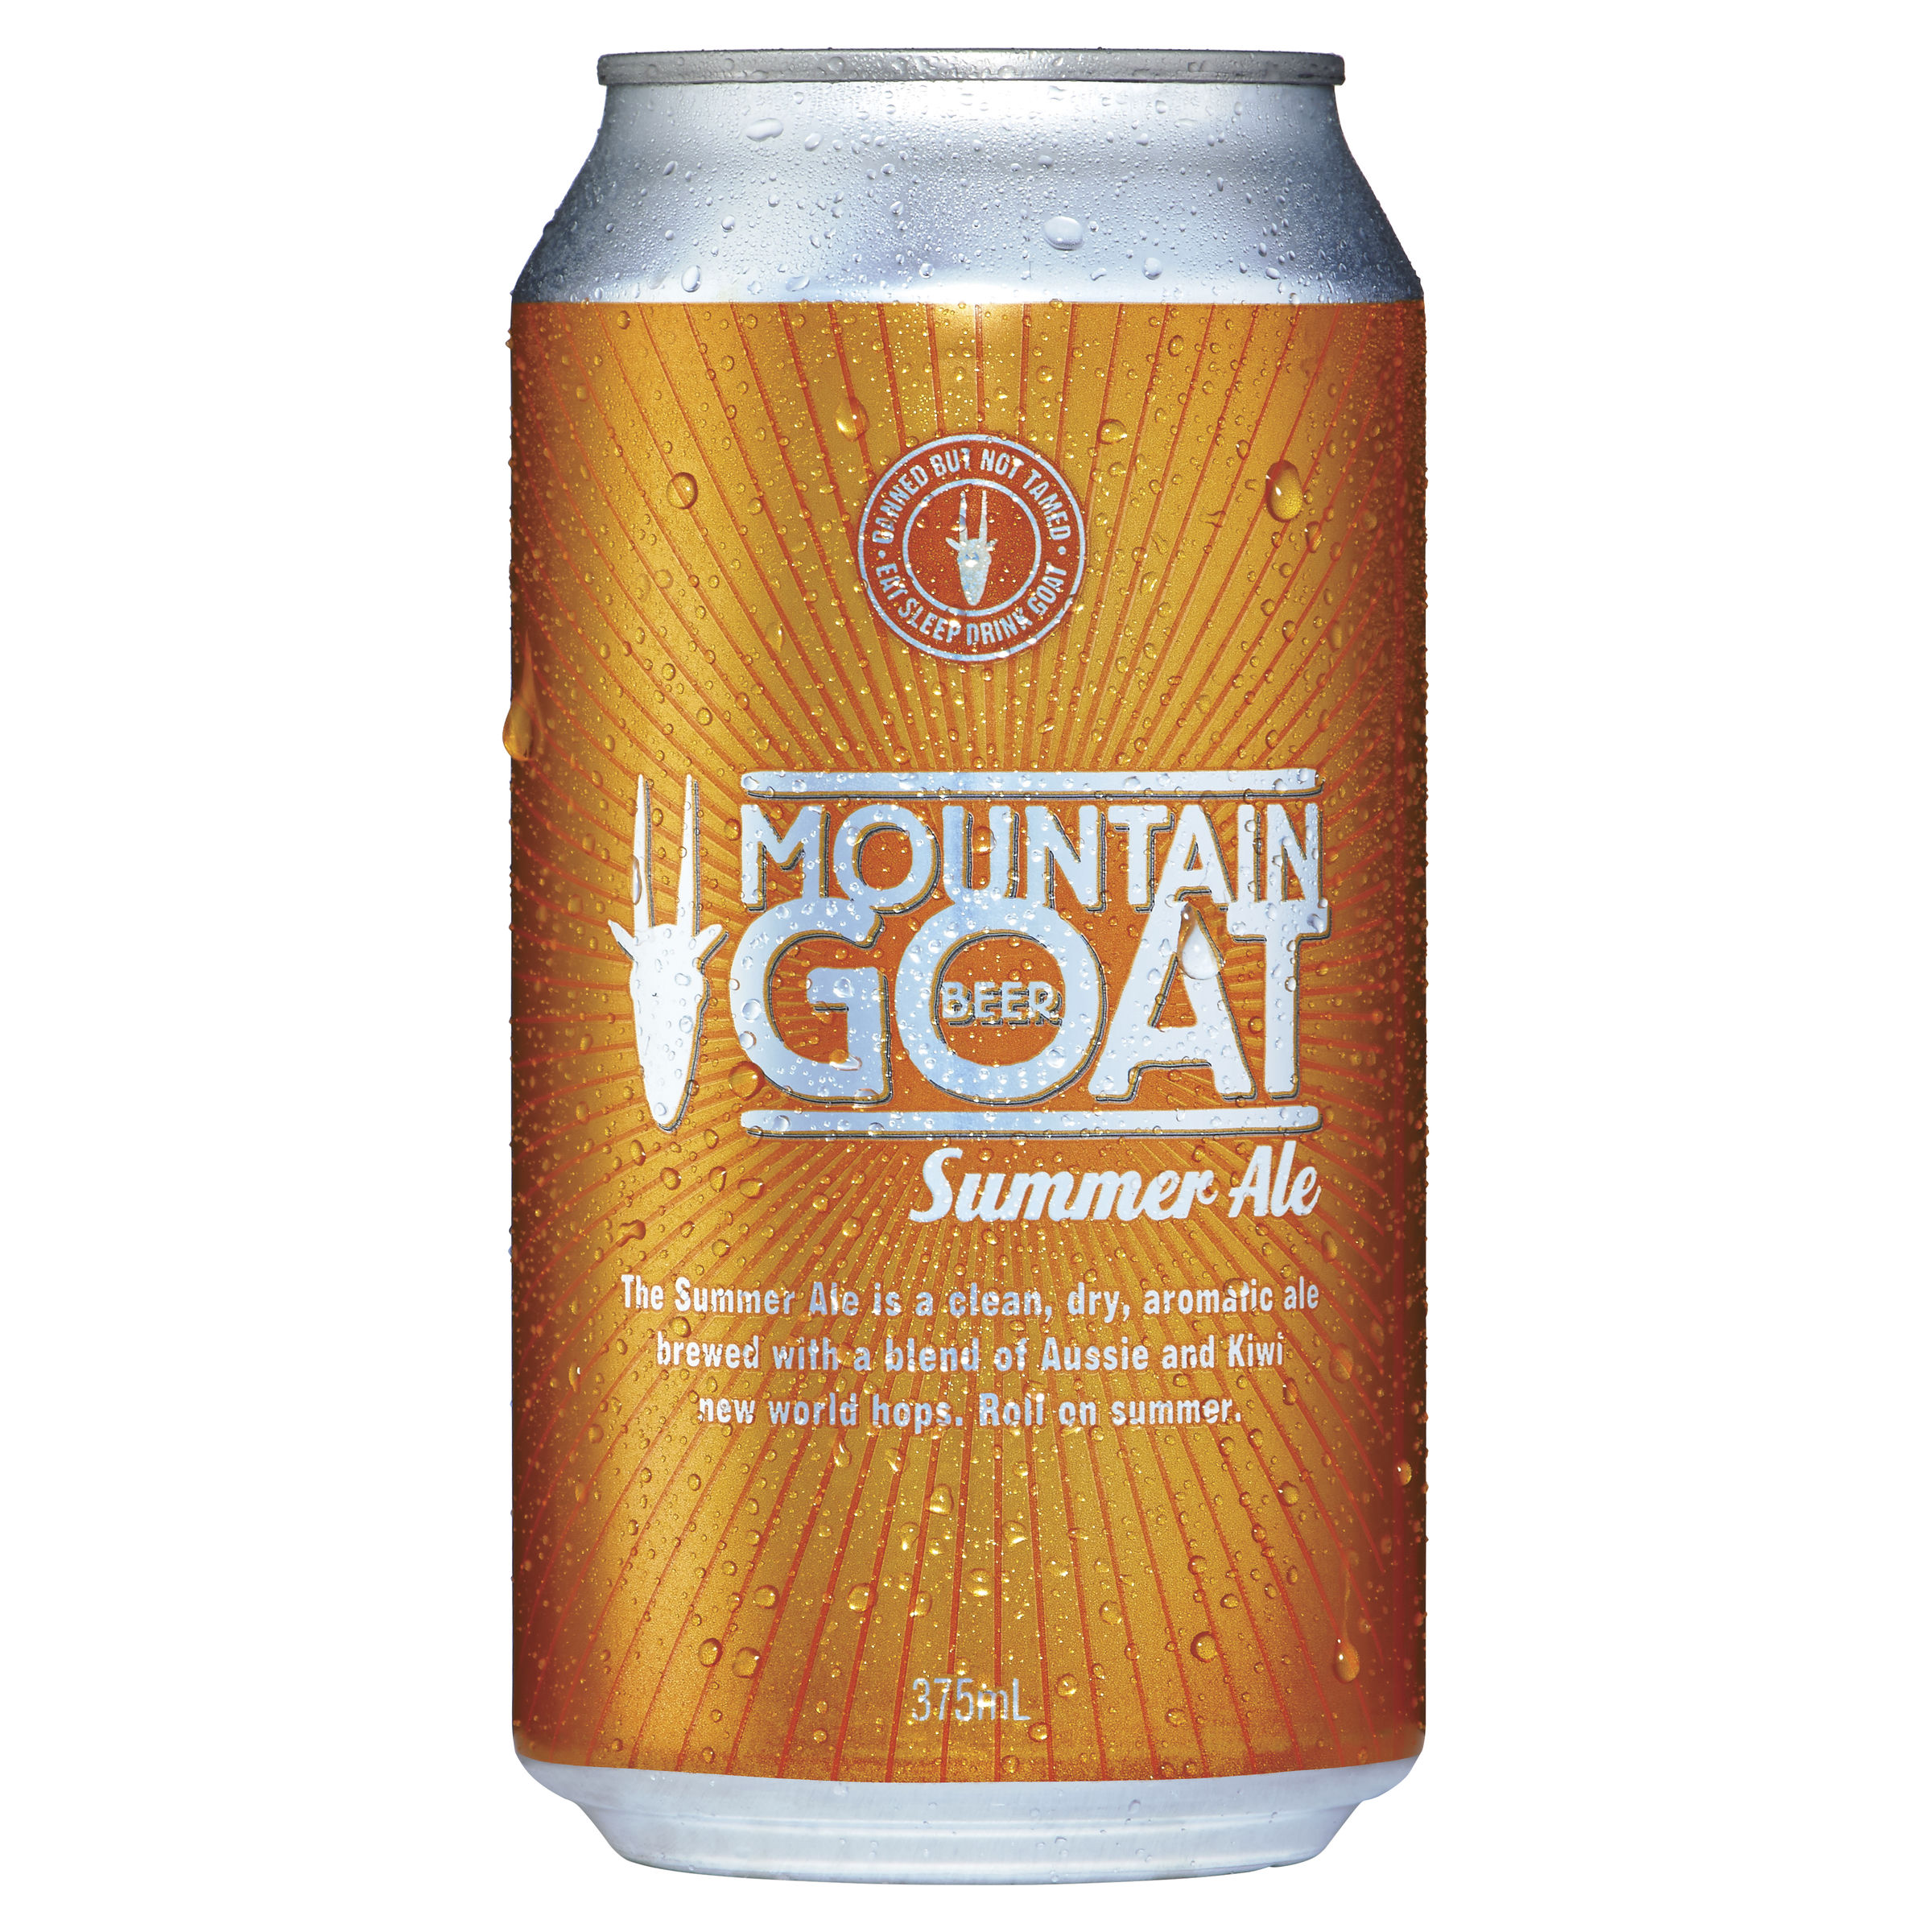 MOUNTAIN GOAT SUMMER ALE